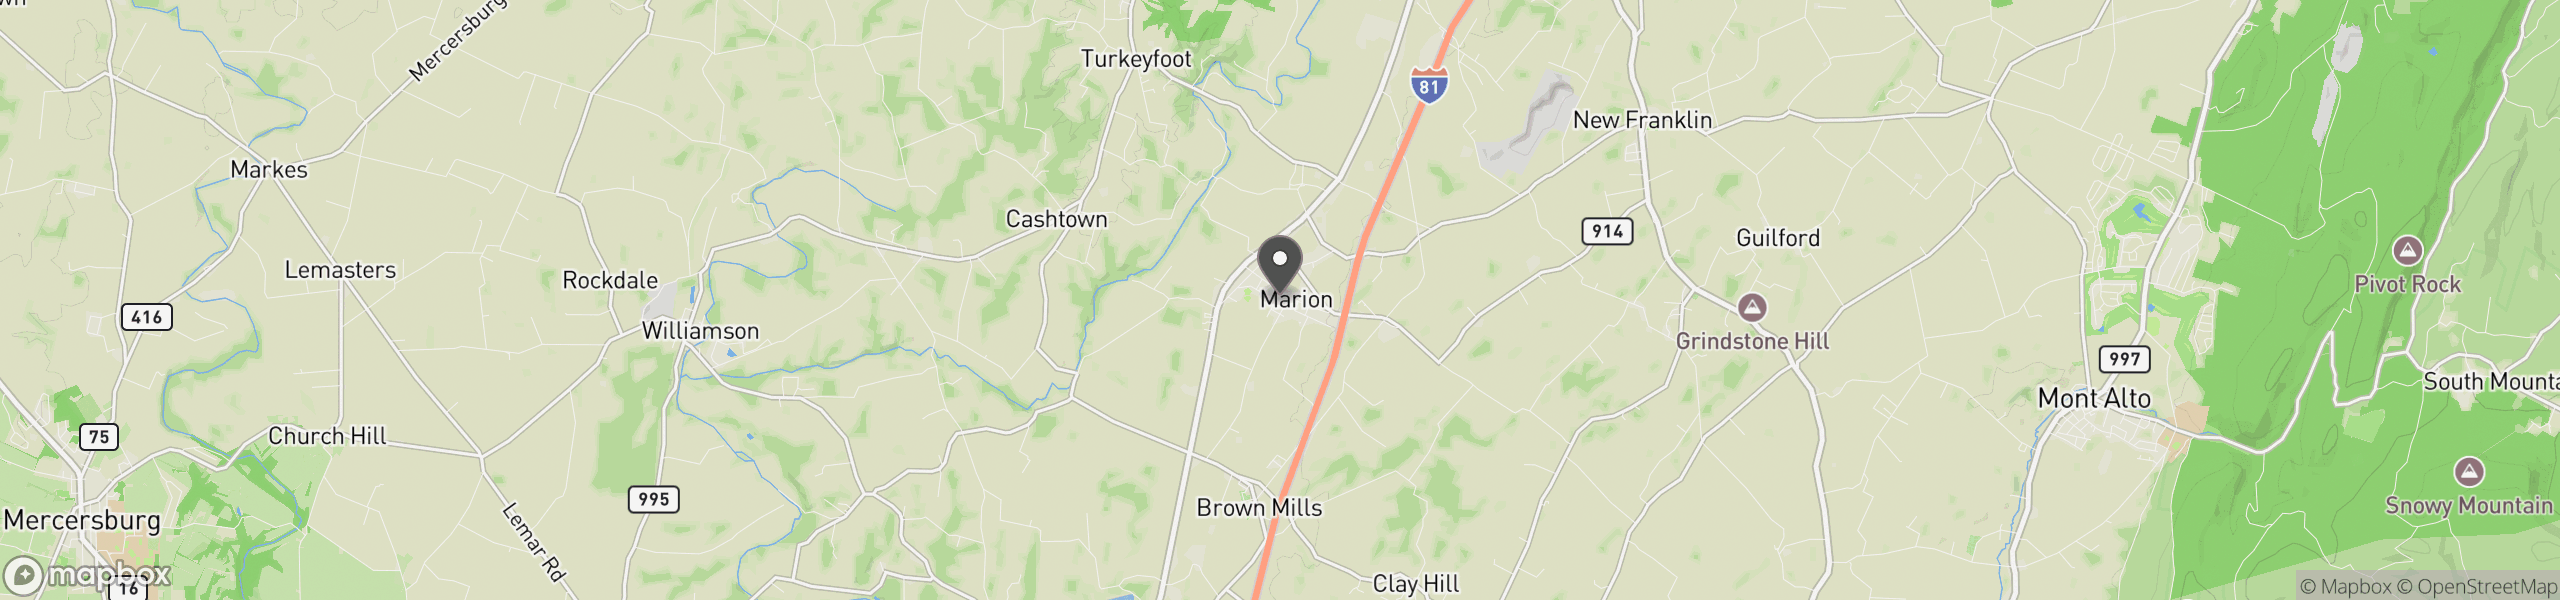 Marion, PA 17235